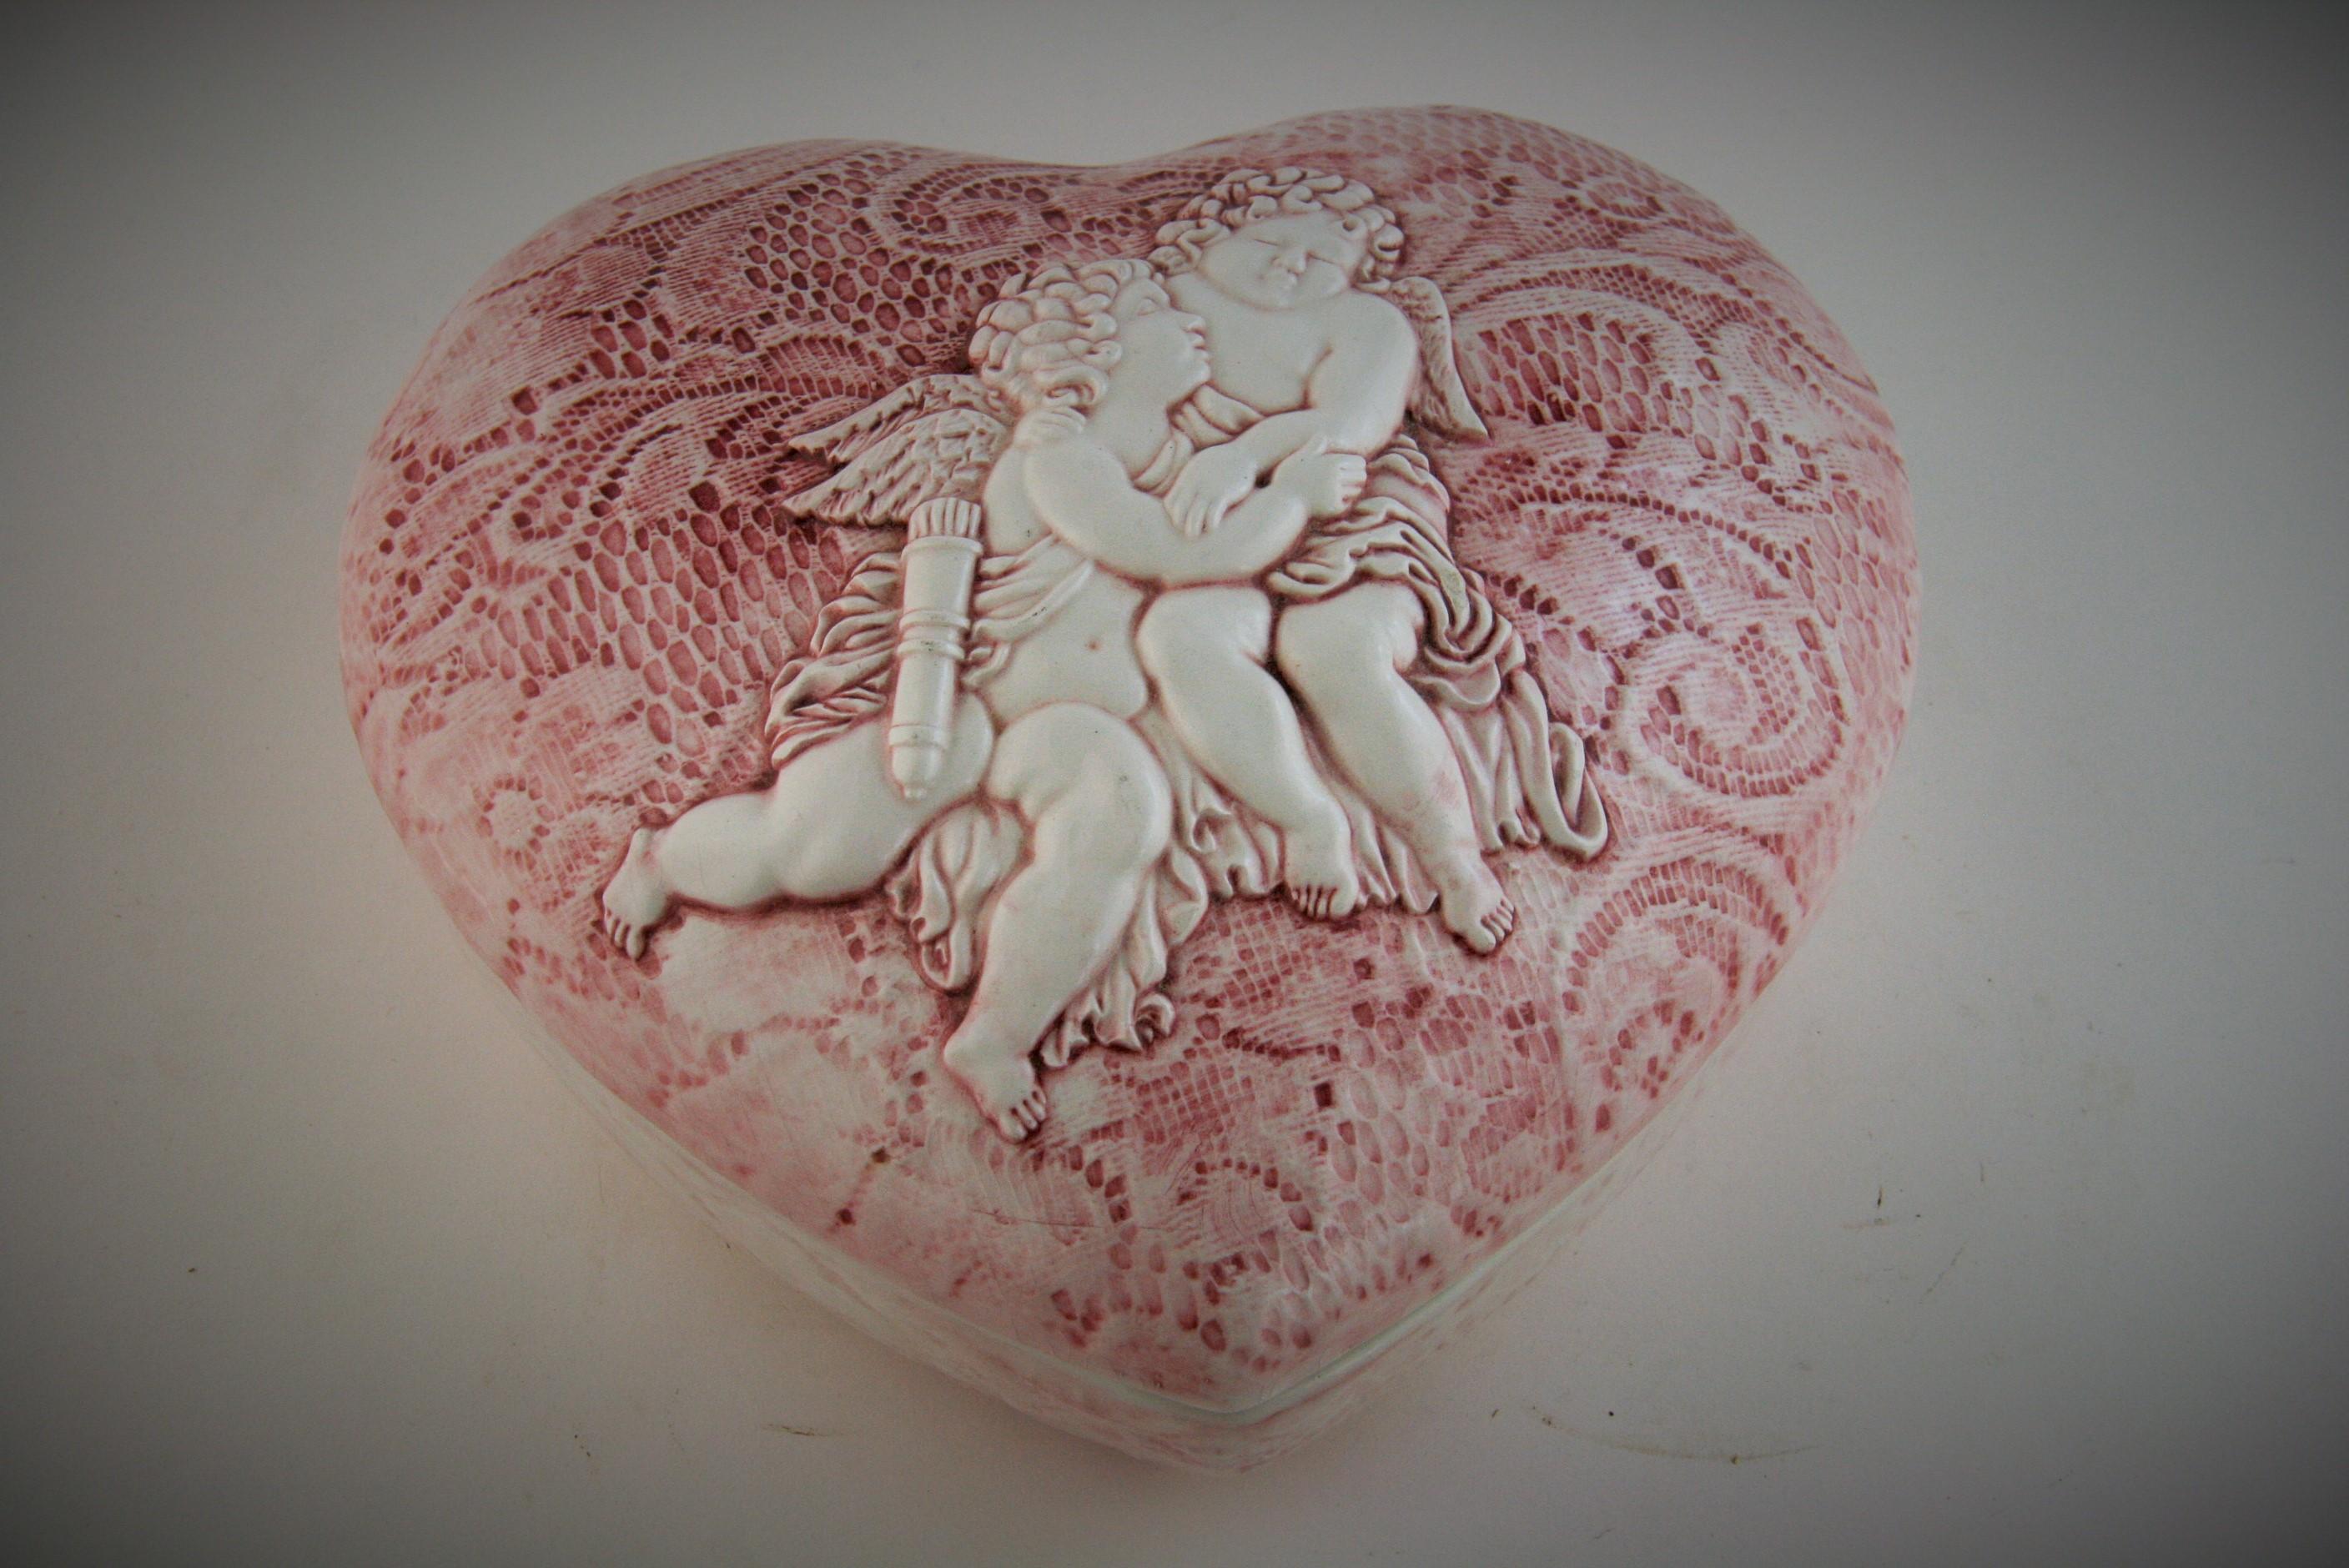 8-239 Italian heart shaped ceramic box with embracing putti top.
Rose colored embroidery detailing on top and bottom sections
Marked made in Italy on bottom.